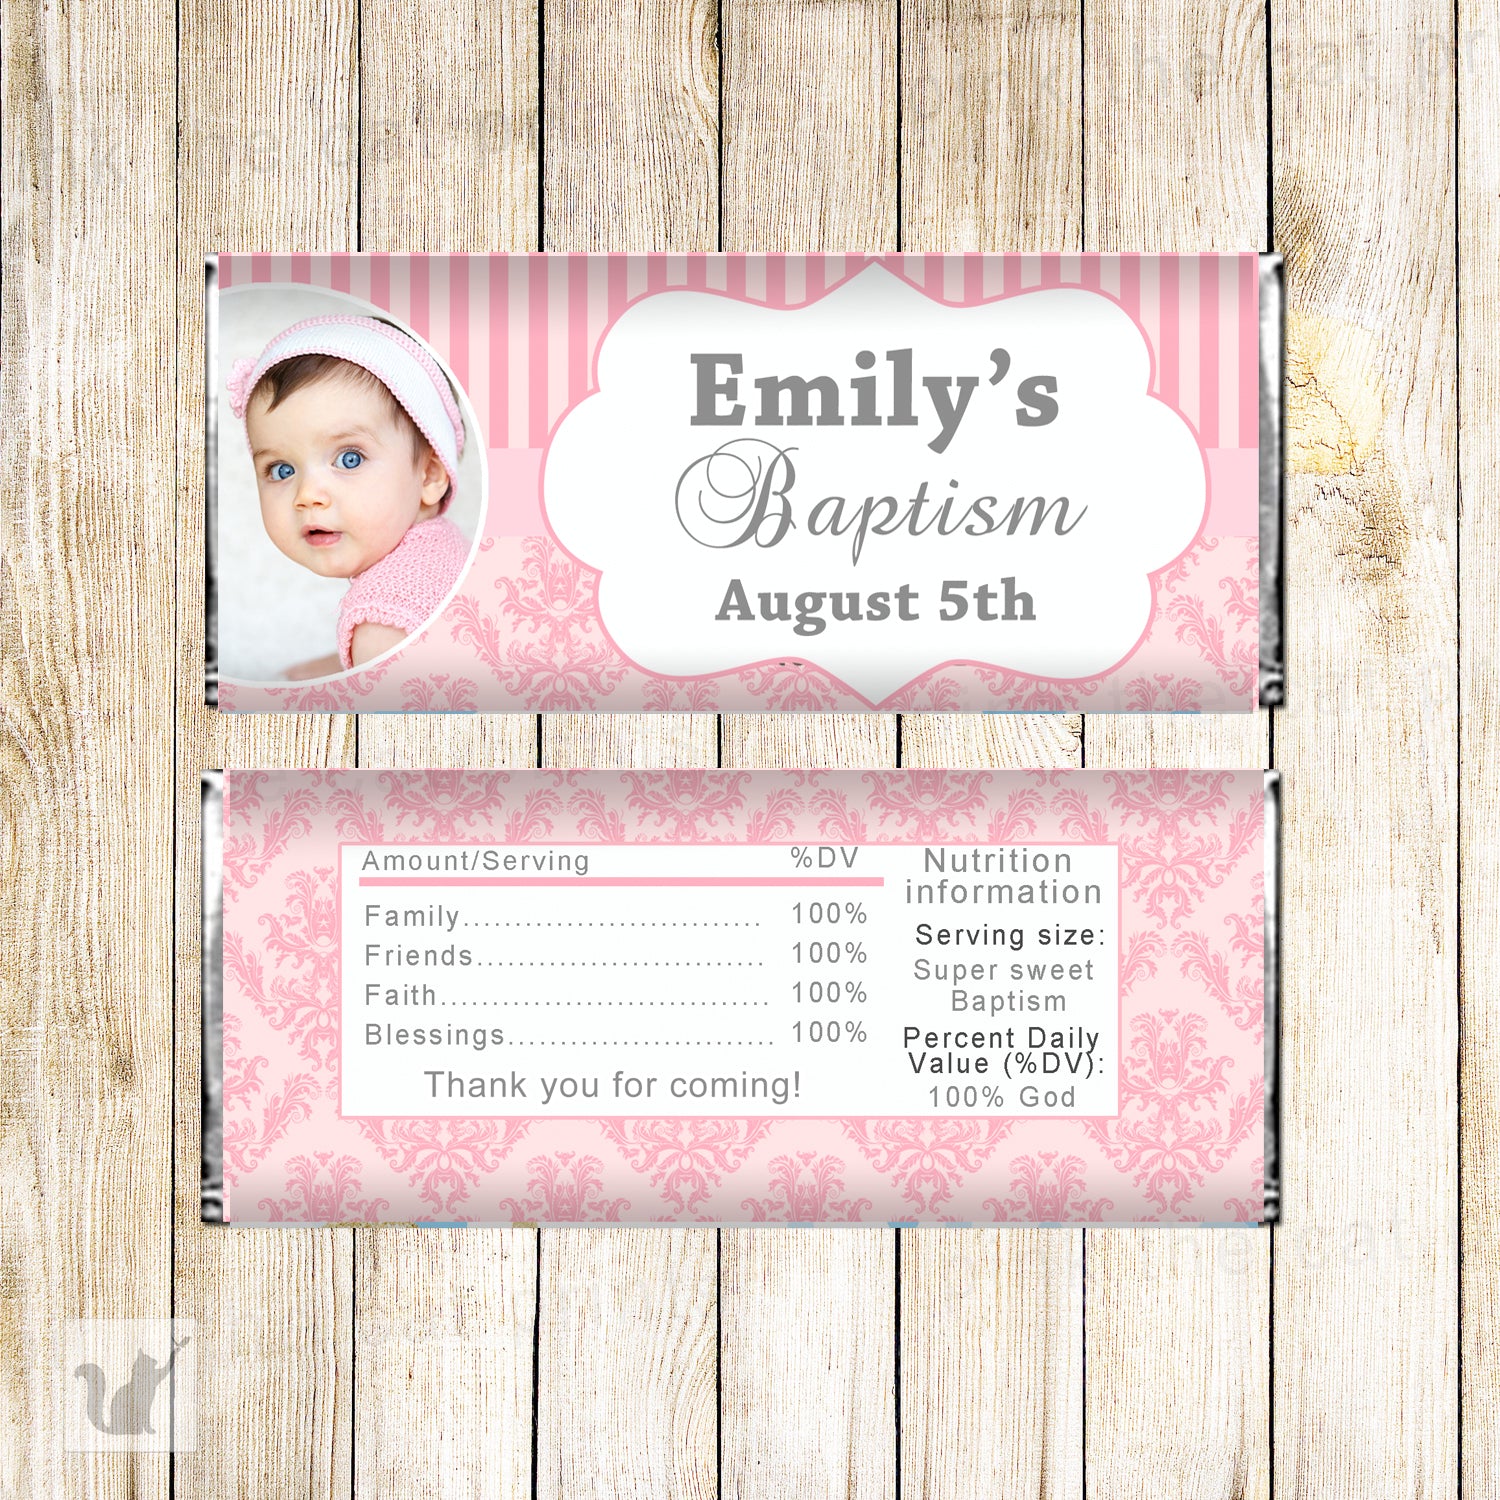 30 Candy bar wrappers girl baptism christening stickers pink